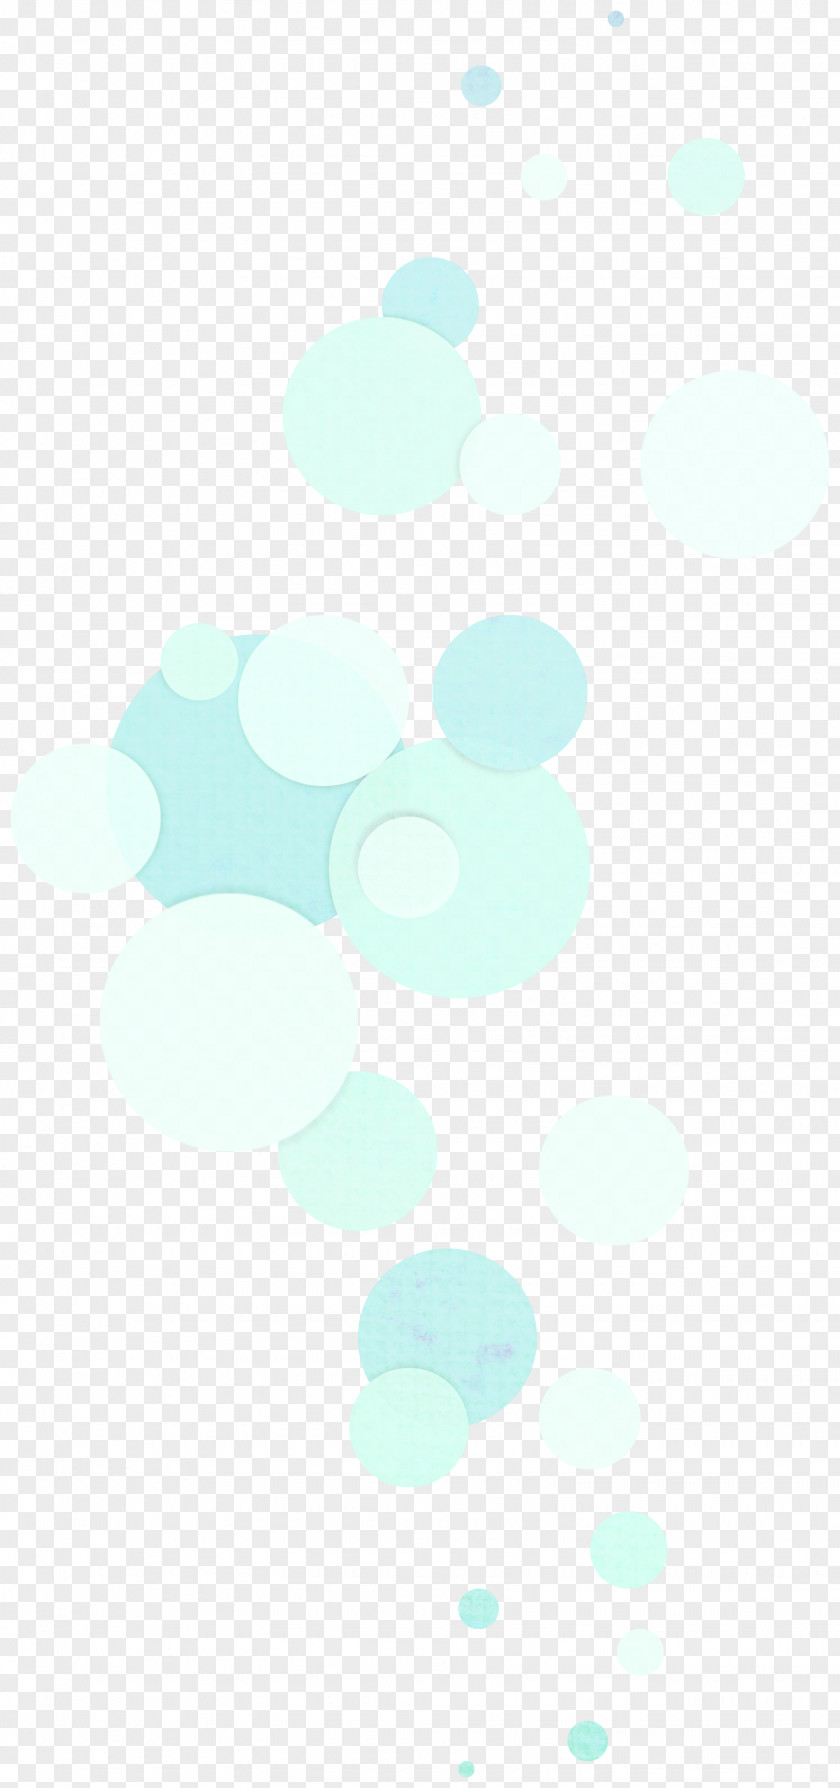 Modified Beautiful Blue Circle Turquoise Sky Wallpaper PNG